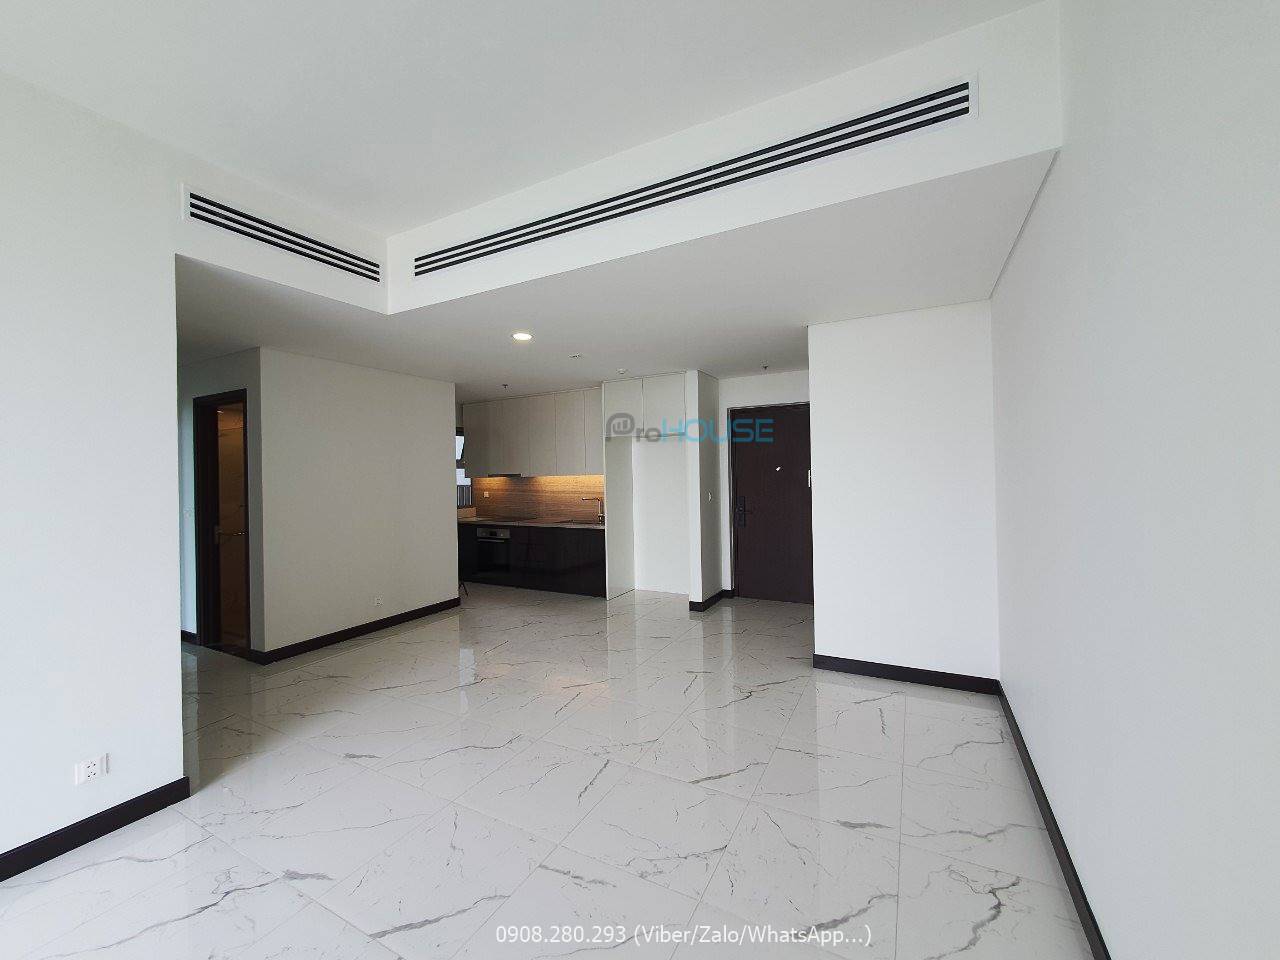 2 br apartment for rent in T2A location number 02 of Linden Residences